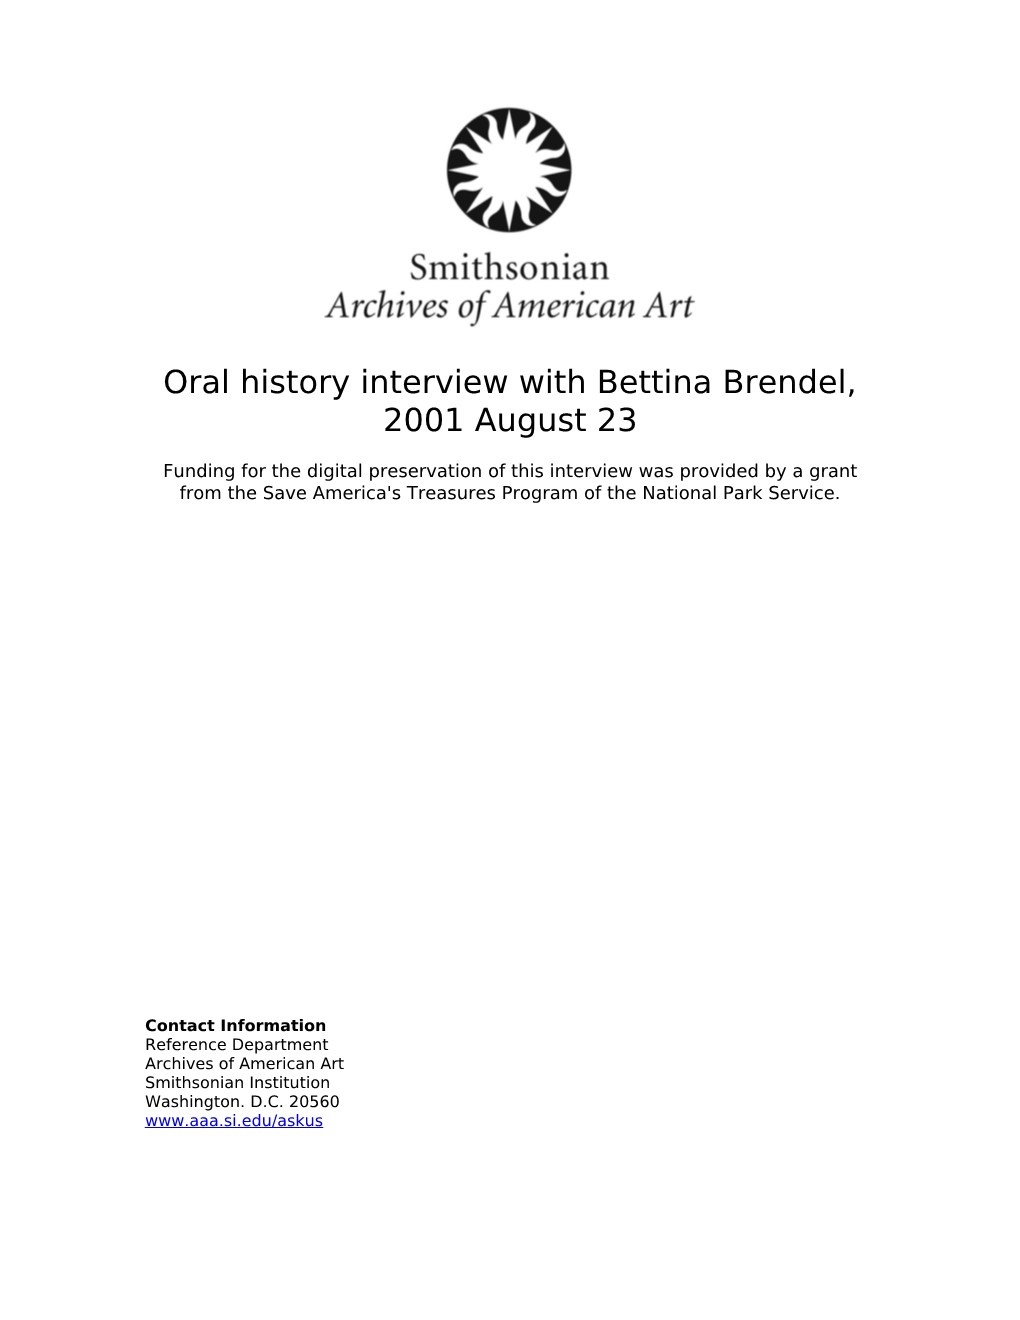 Oral History Interview with Bettina Brendel, 2001 August 23